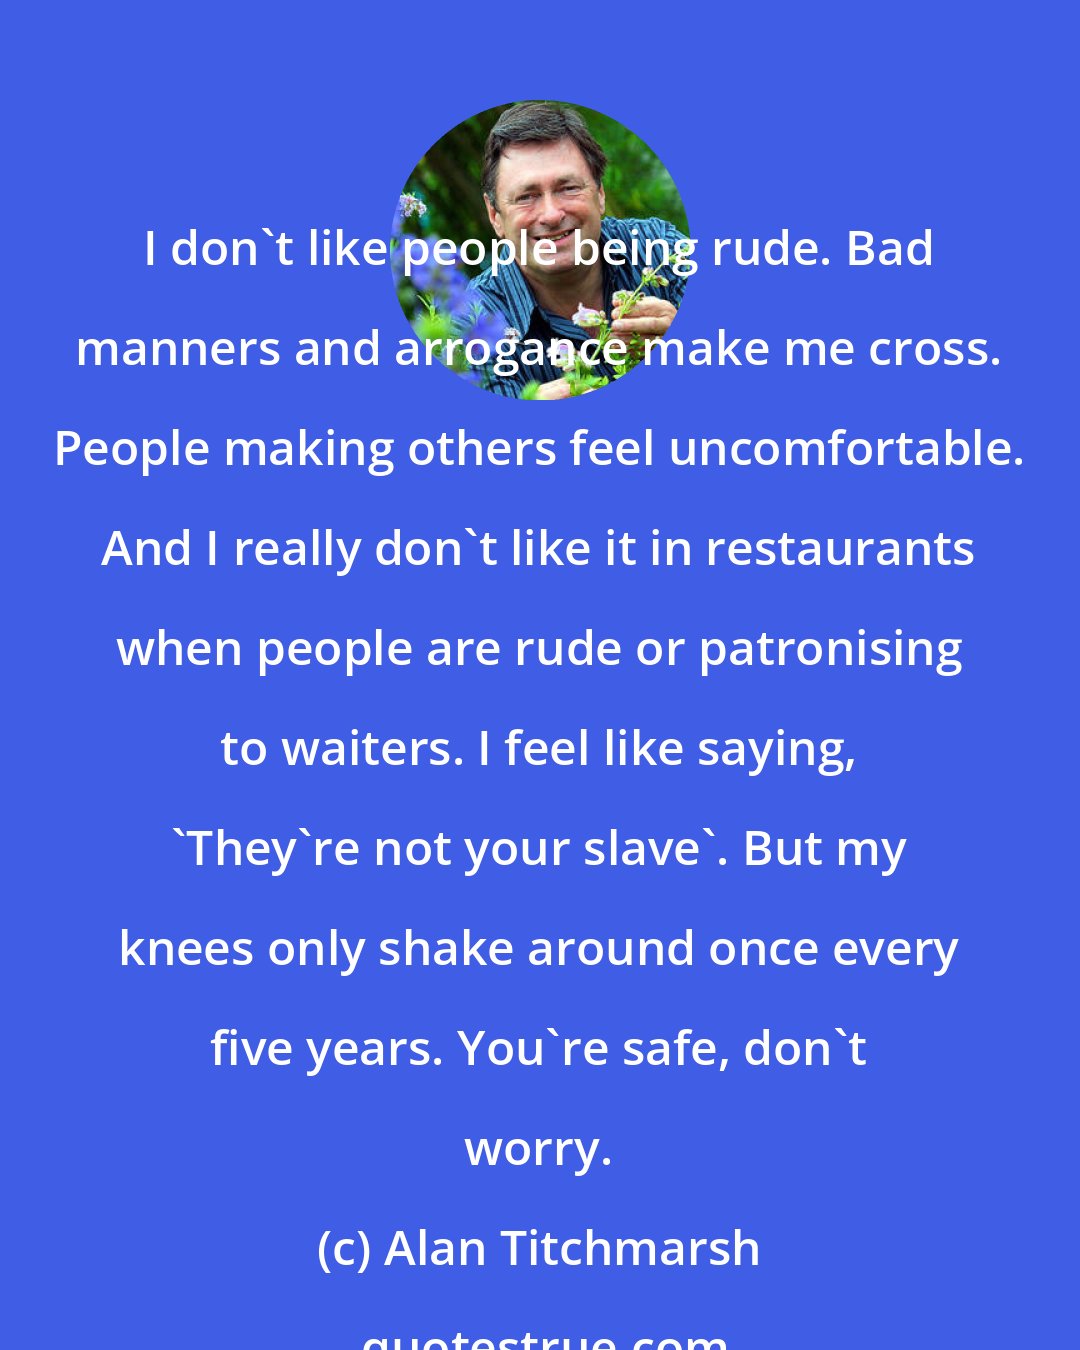 Alan Titchmarsh: I don't like people being rude. Bad manners and arrogance make me cross. People making others feel uncomfortable. And I really don't like it in restaurants when people are rude or patronising to waiters. I feel like saying, 'They're not your slave'. But my knees only shake around once every five years. You're safe, don't worry.